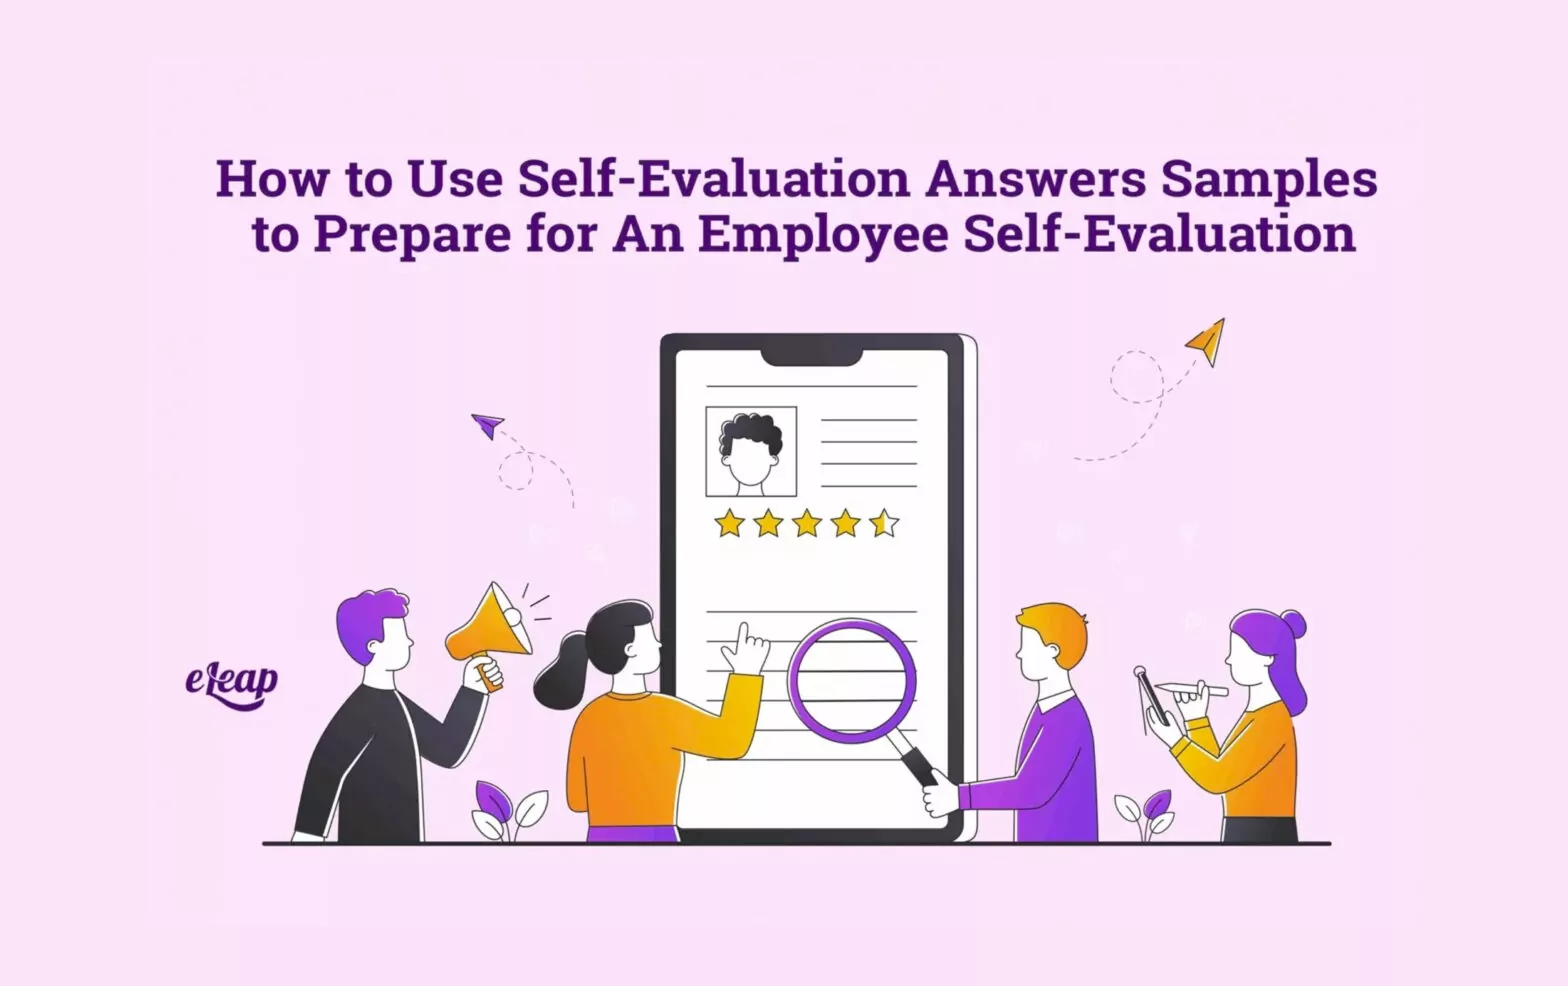 How to Use Self-Evaluation Answers Samples to Prepare for An Employee Self-Evaluation